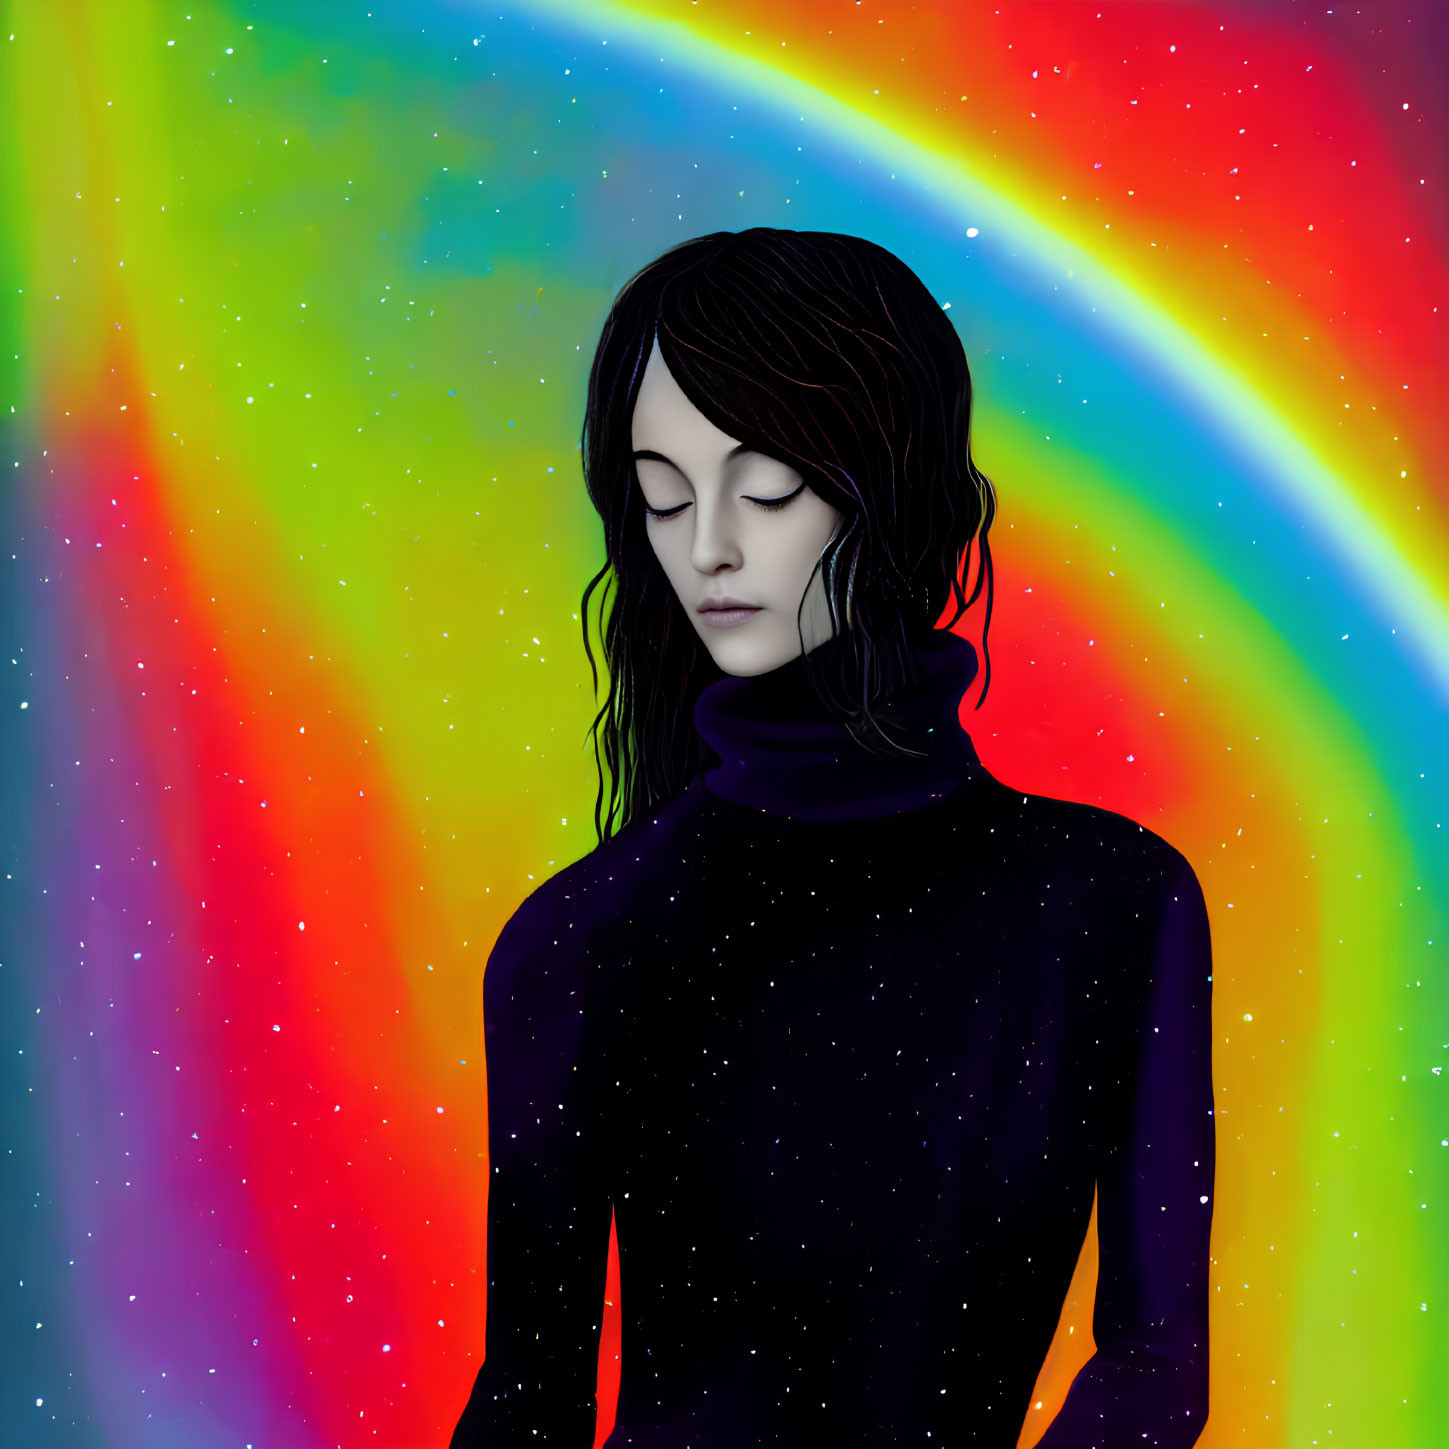 Digital illustration: Dark-haired person in cosmic setting with rainbow and stars